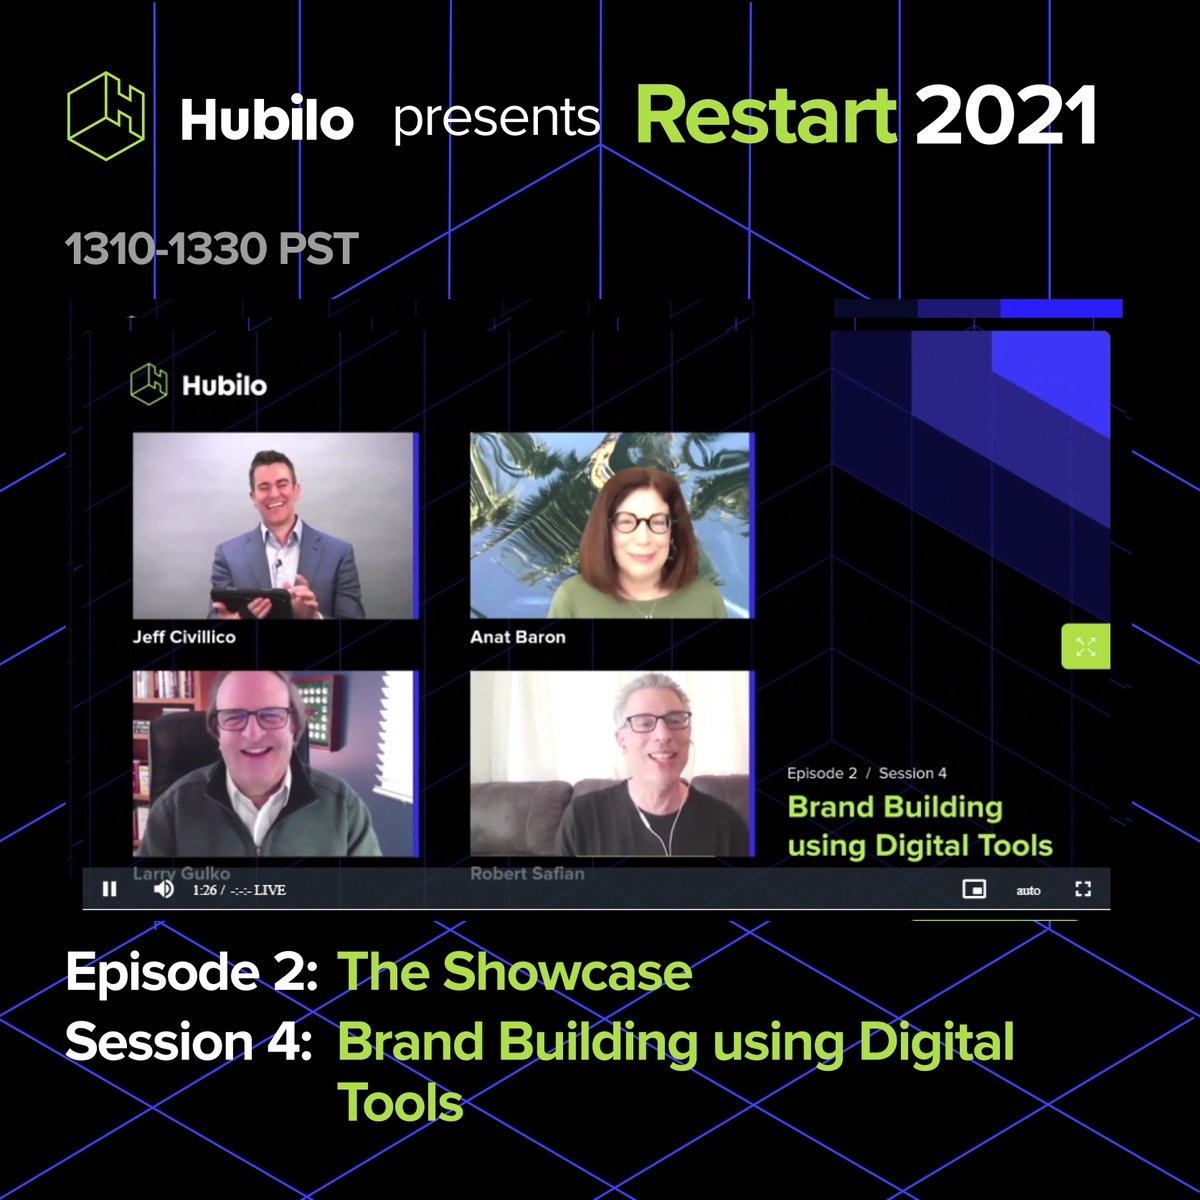 @beerwars, @lgulko & @rsafian just shared insights on building brands with digital tools in an extremely competitive environment!

If #FOMO has kicked in, don’t worry you can still register for the event at hubilo.com/restart-2021/#…!

#Restart2021withHubilo